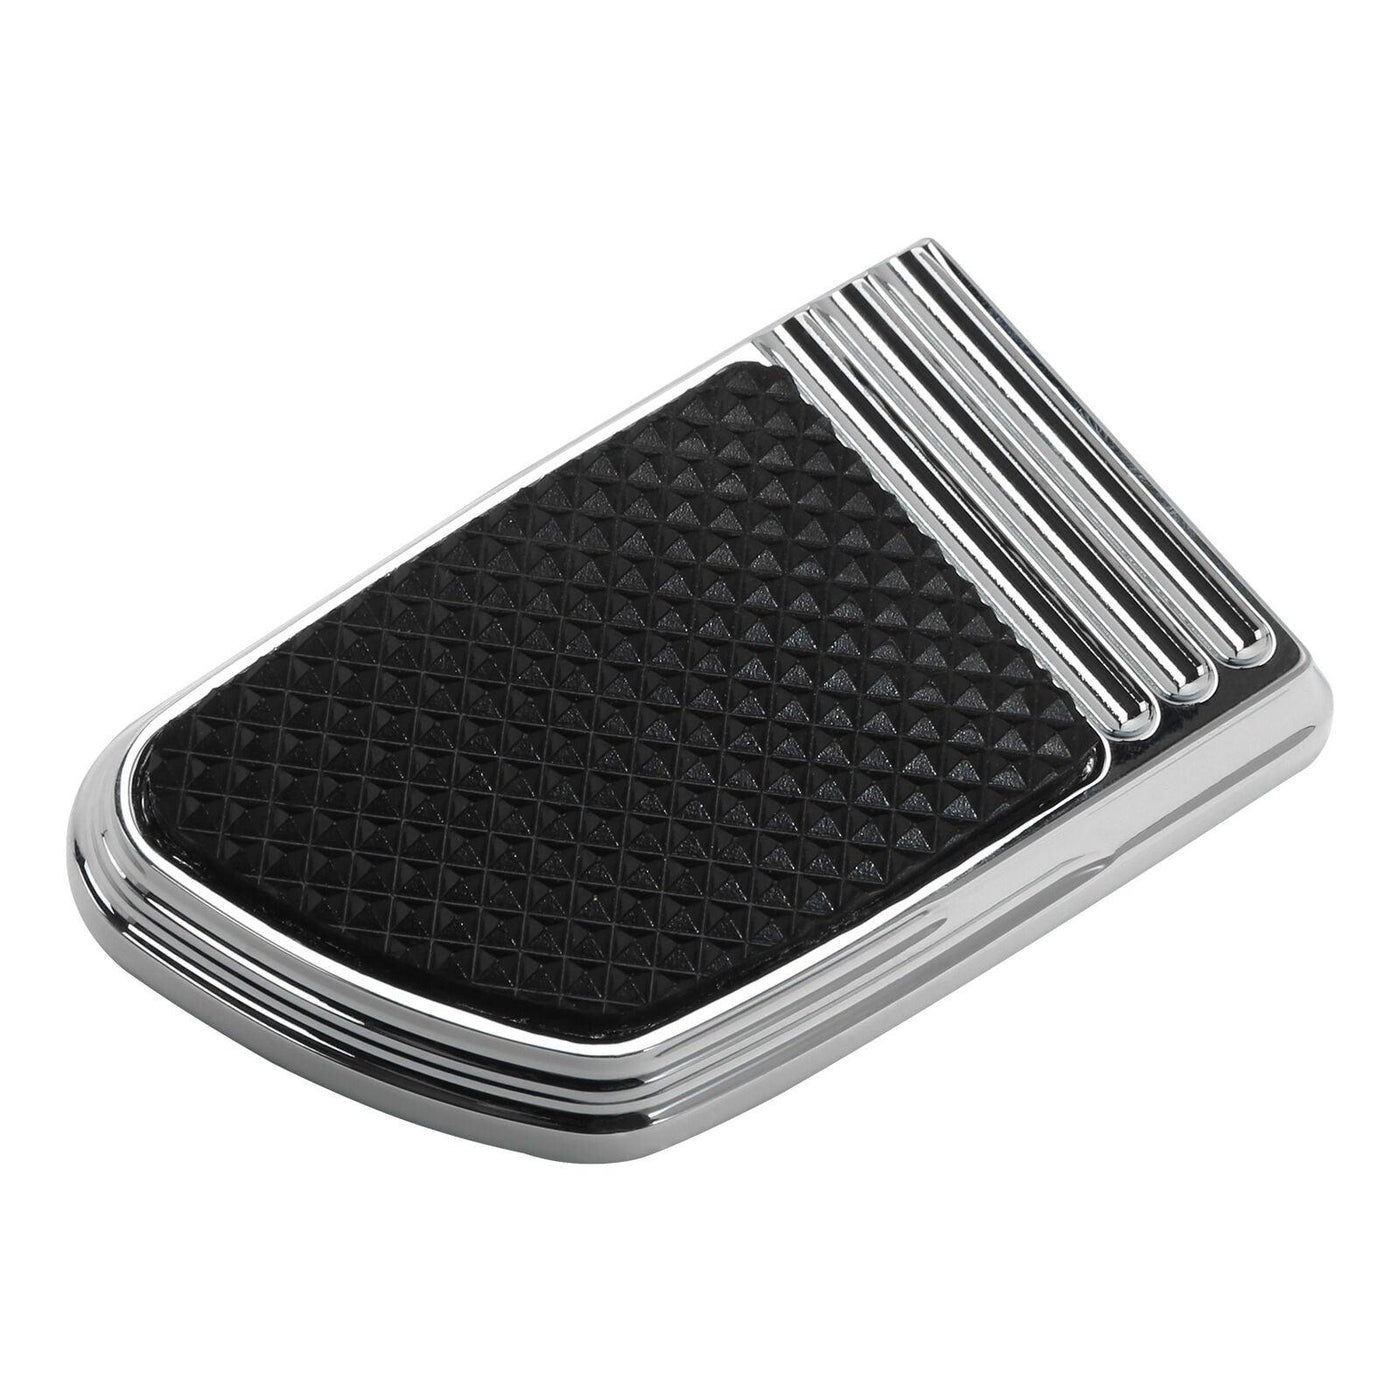 Chrome Brake Pedal Pad Fit For Harley Street XG500 750 2015-Up Softail 1984-2017 - Moto Life Products